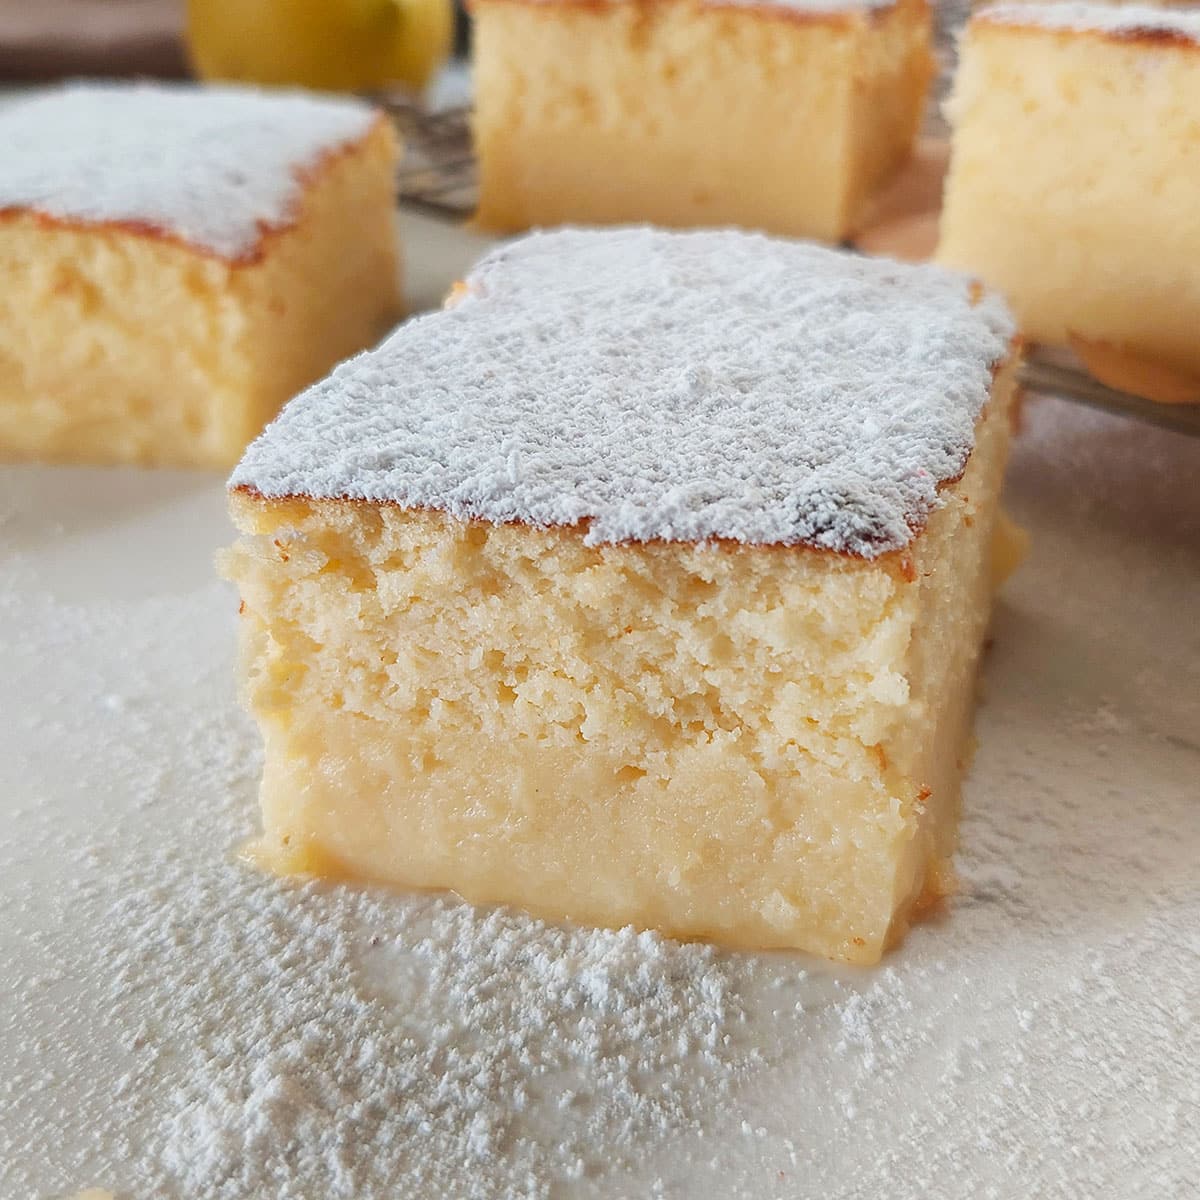 Made up of one simple batter this Lemon Magic Custard Cake ends up in a beautiful cake with three different textures.